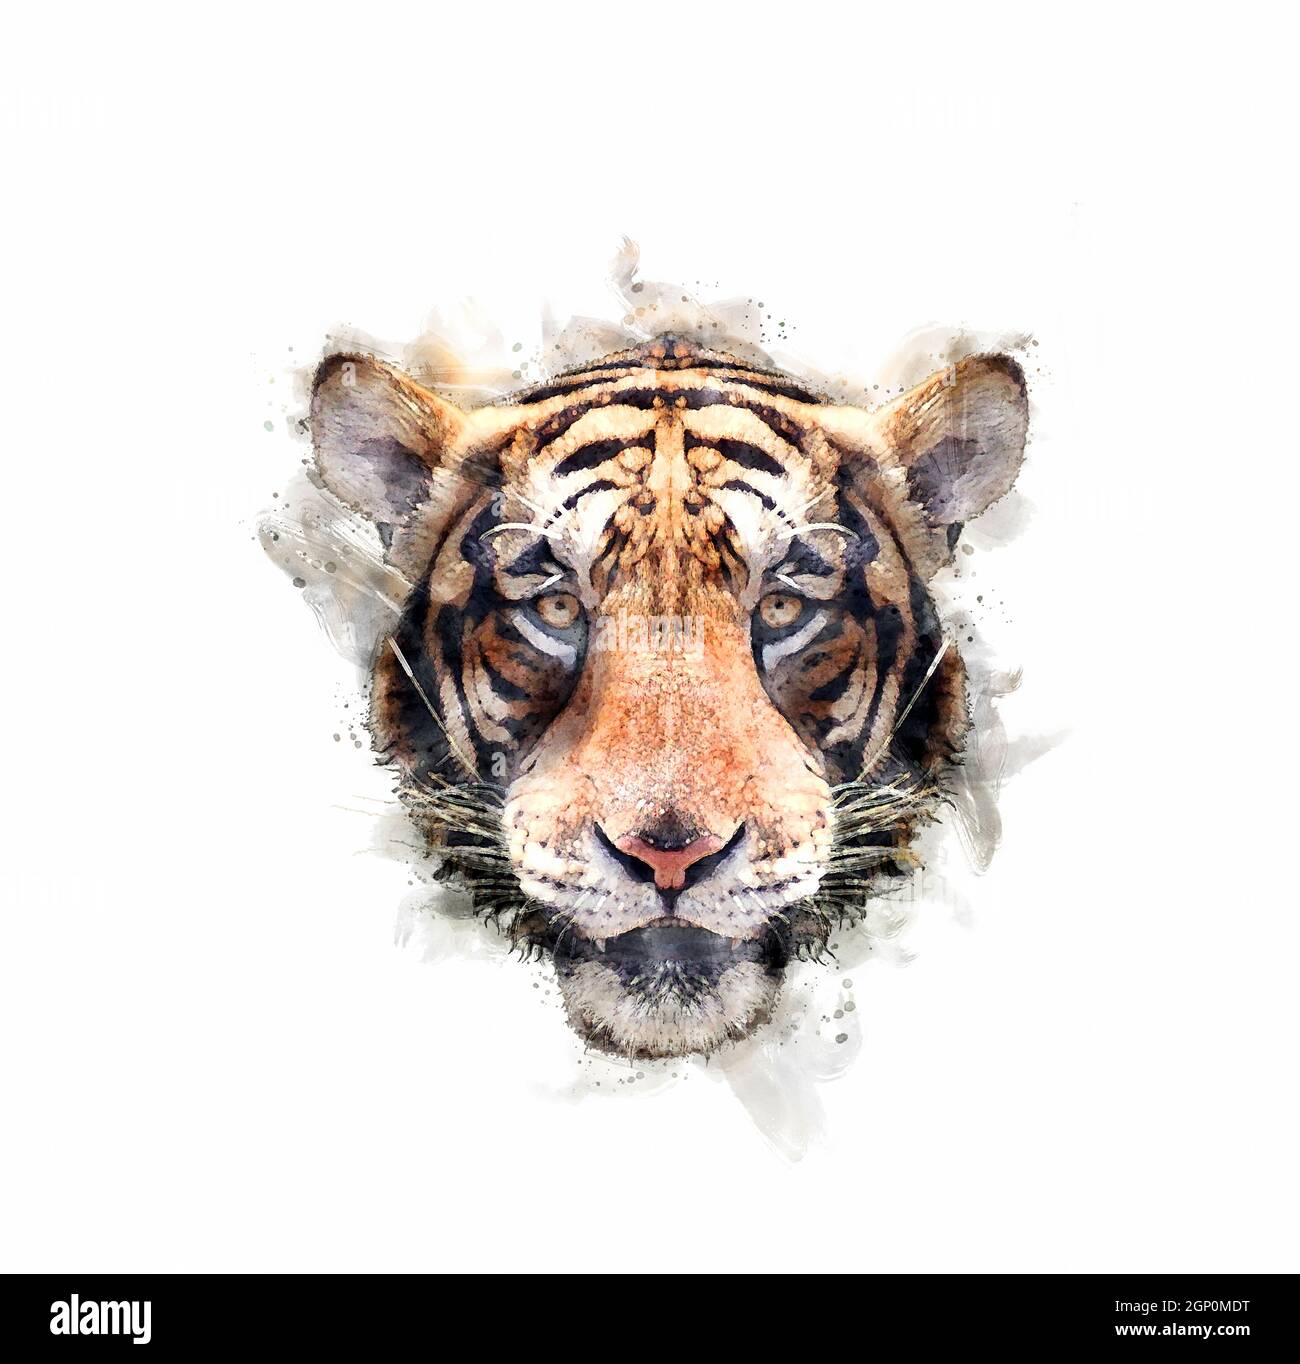 Portrait of the tiger head Watercolor style. Stock Photo